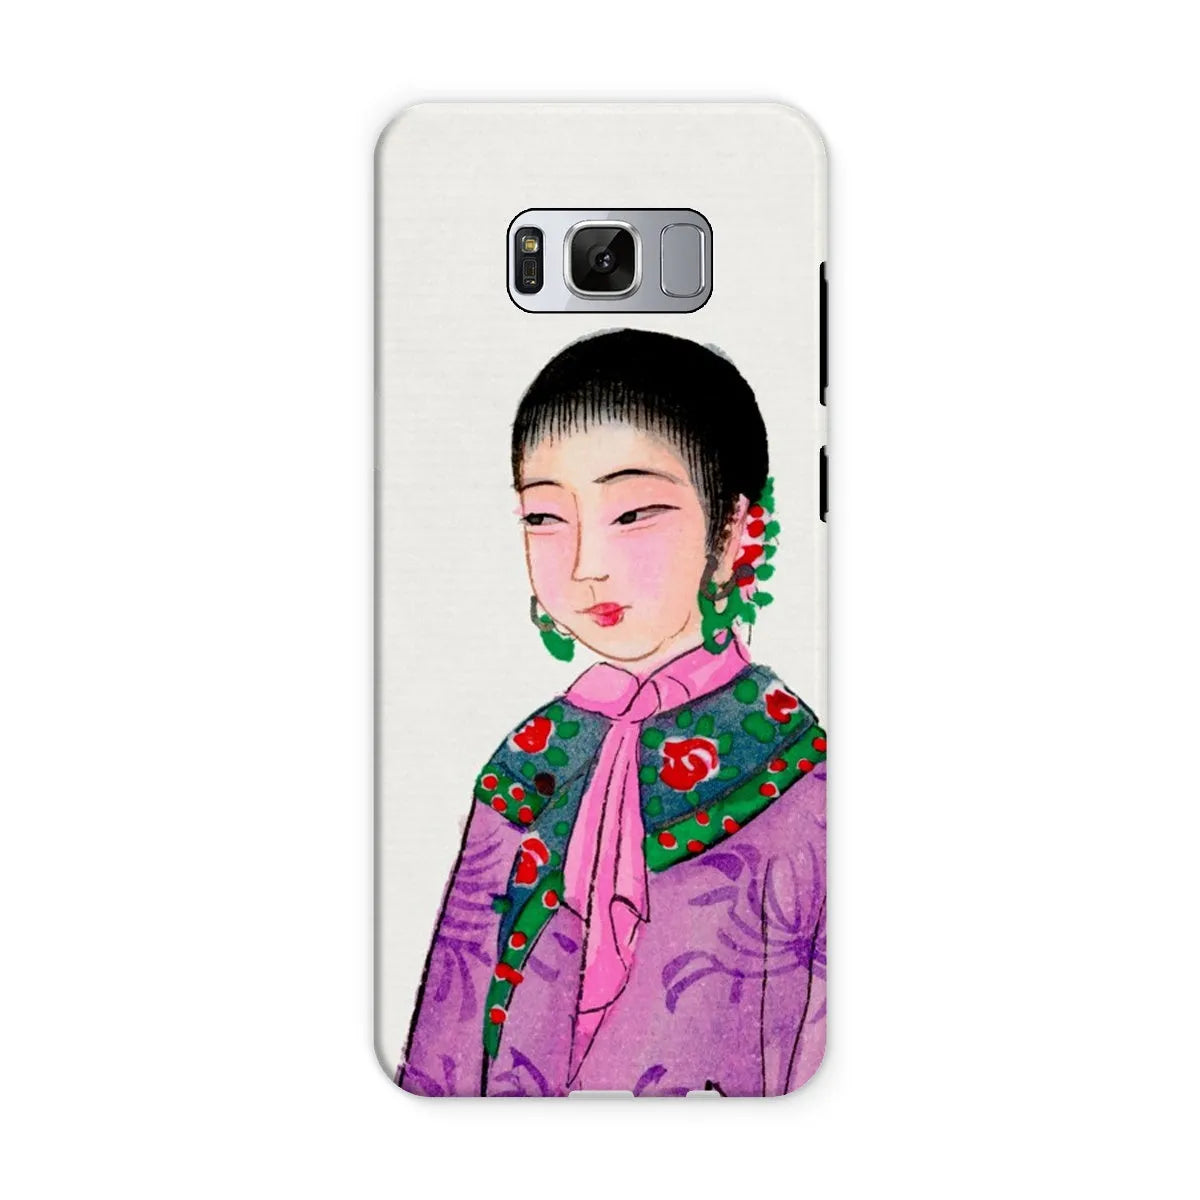 Manchu Noblewoman - Chinese Aesthetic Art Phone Case - Samsung Galaxy S8 / Matte - Mobile Phone Cases - Aesthetic Art